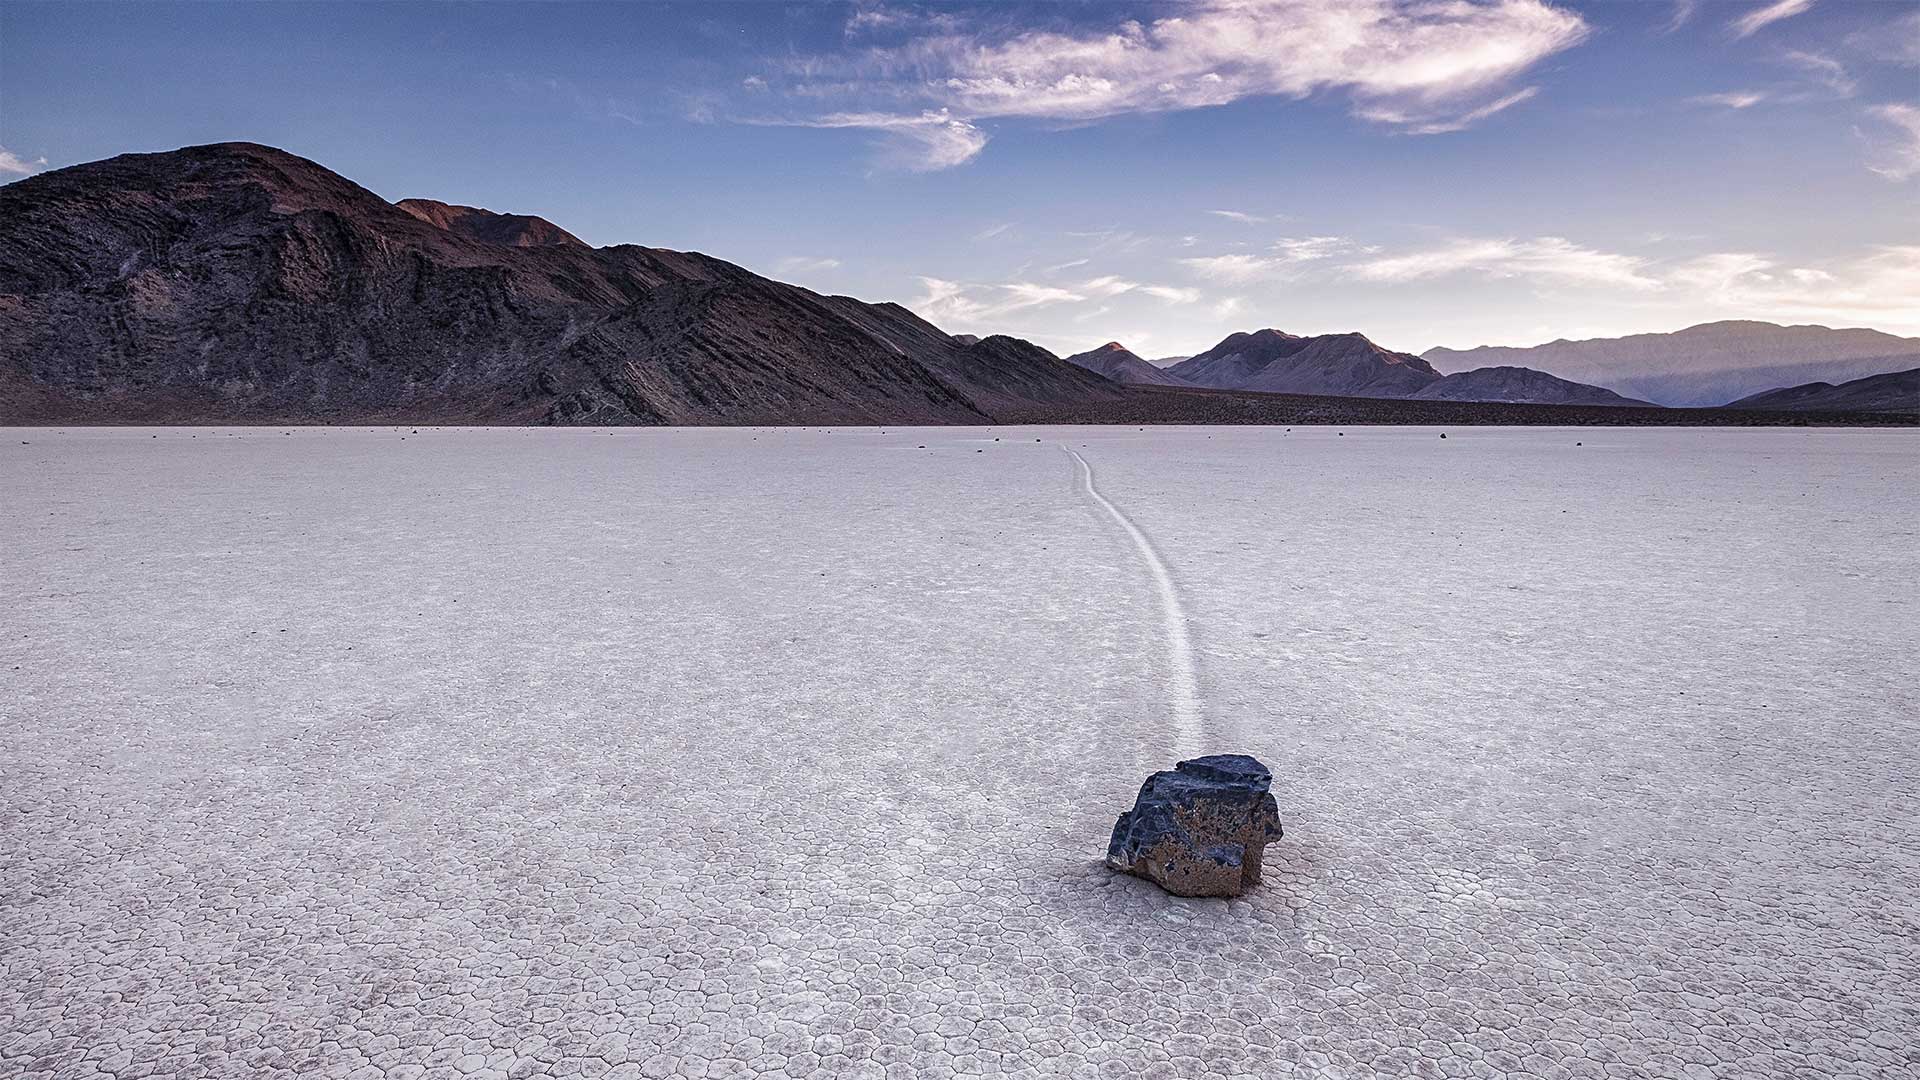 Sailing stone at Racetrack Playa in Death Valley National Park, California - Patrick Walsh/Getty Images)